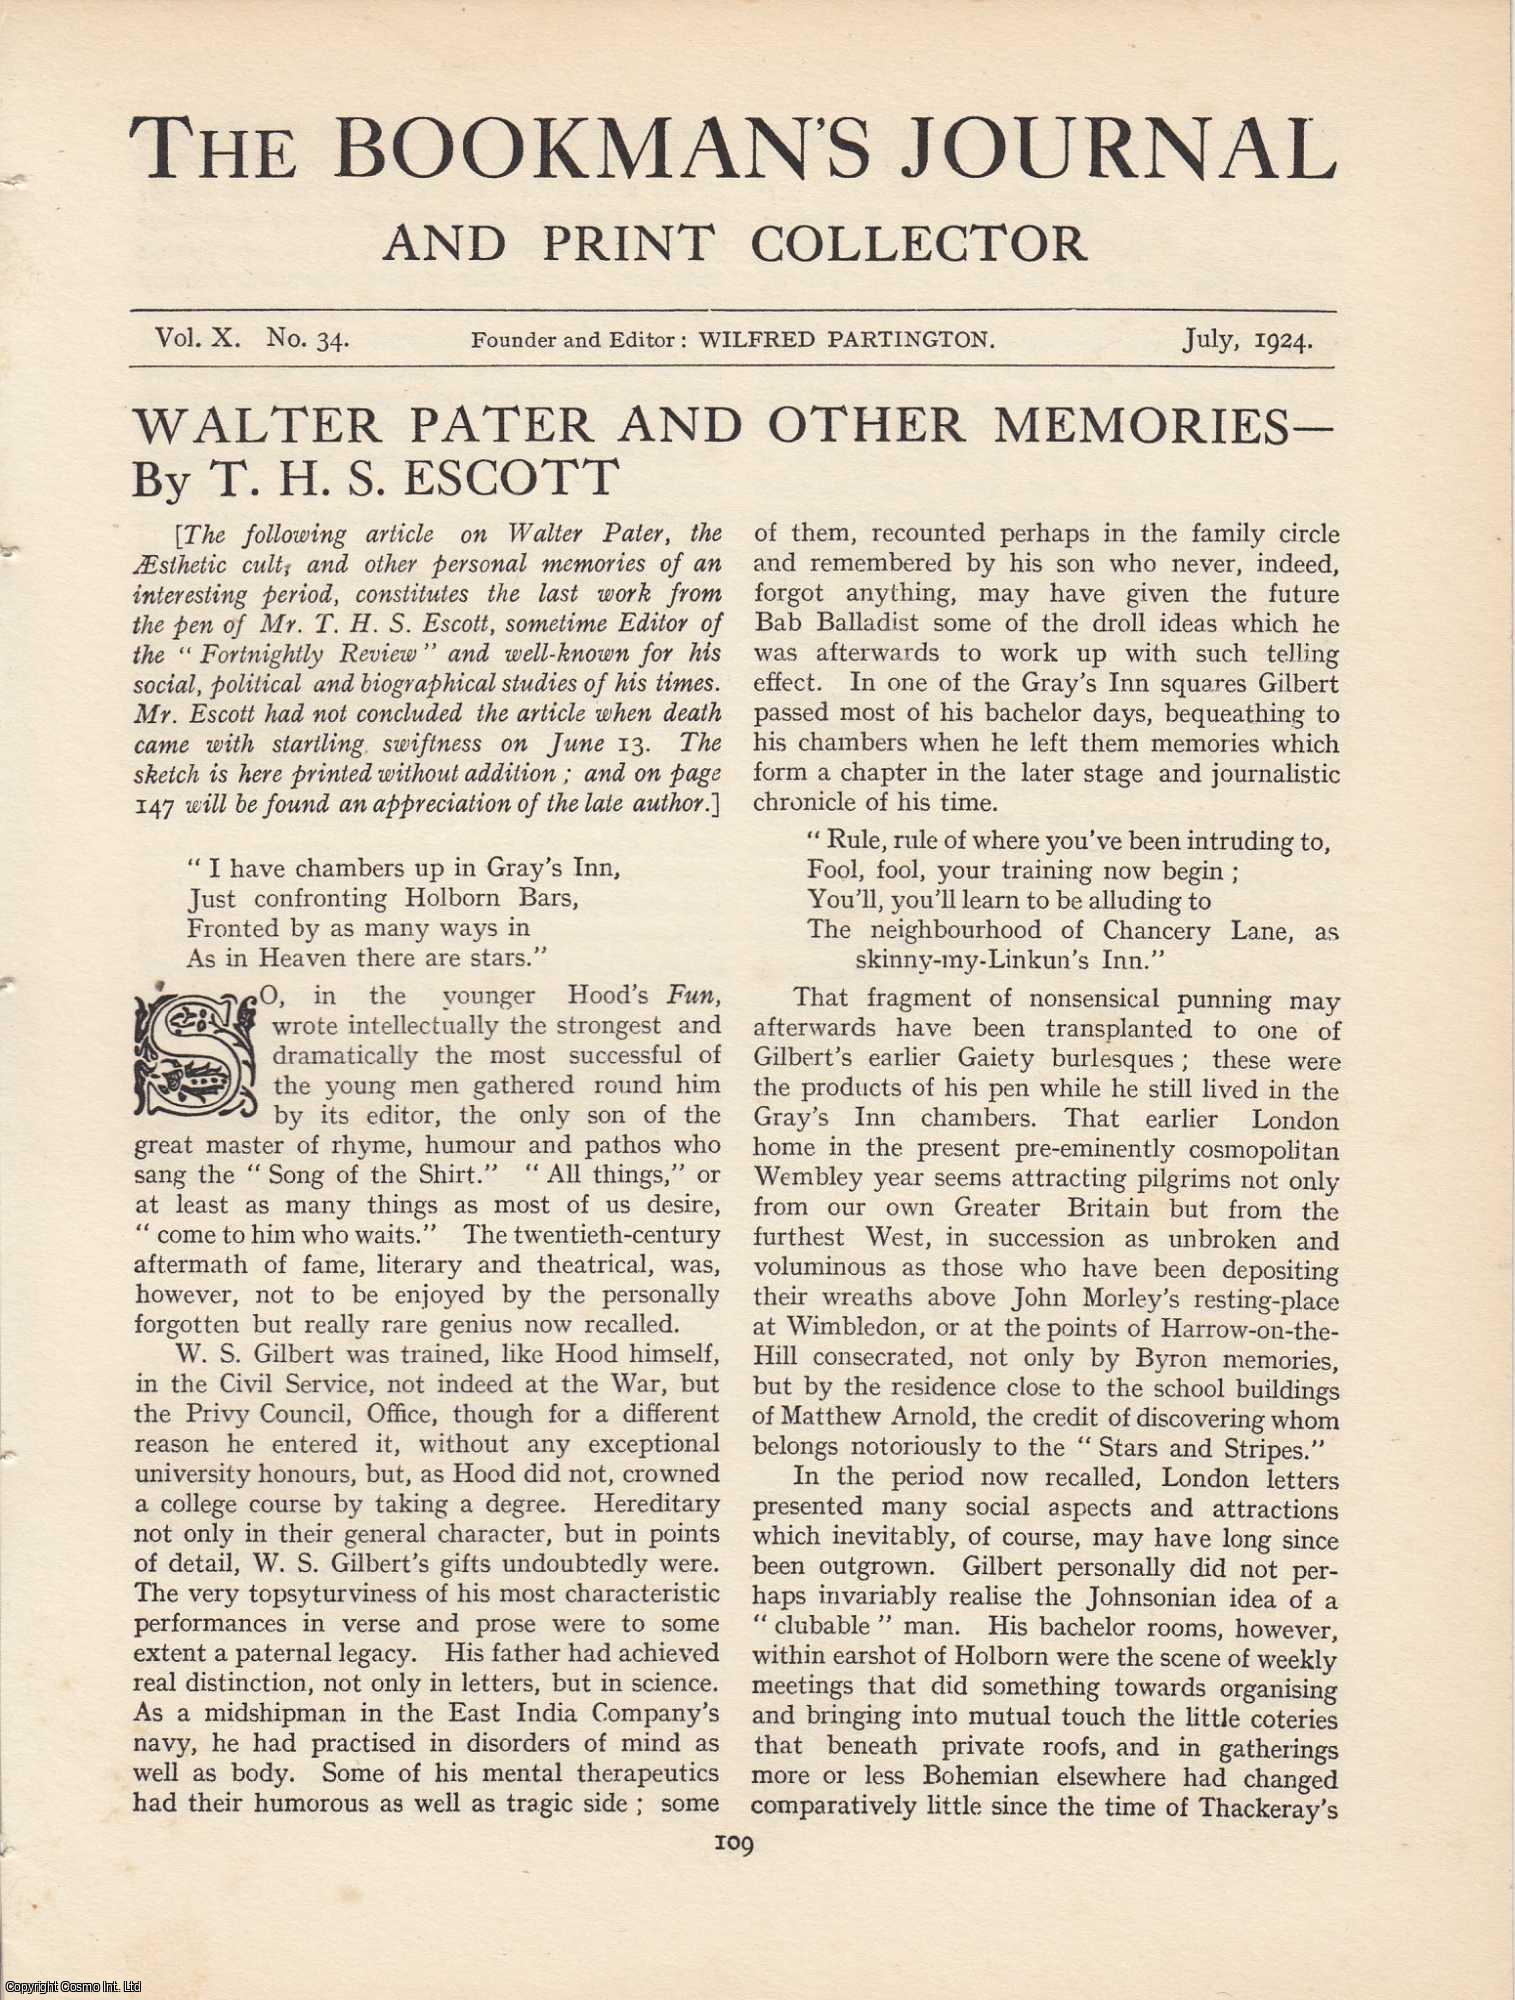 T.H.S. Escott - Walter Pater and Other Memories. An original article from The Bookman's Journal. Published by Bookman's Journal 1924.